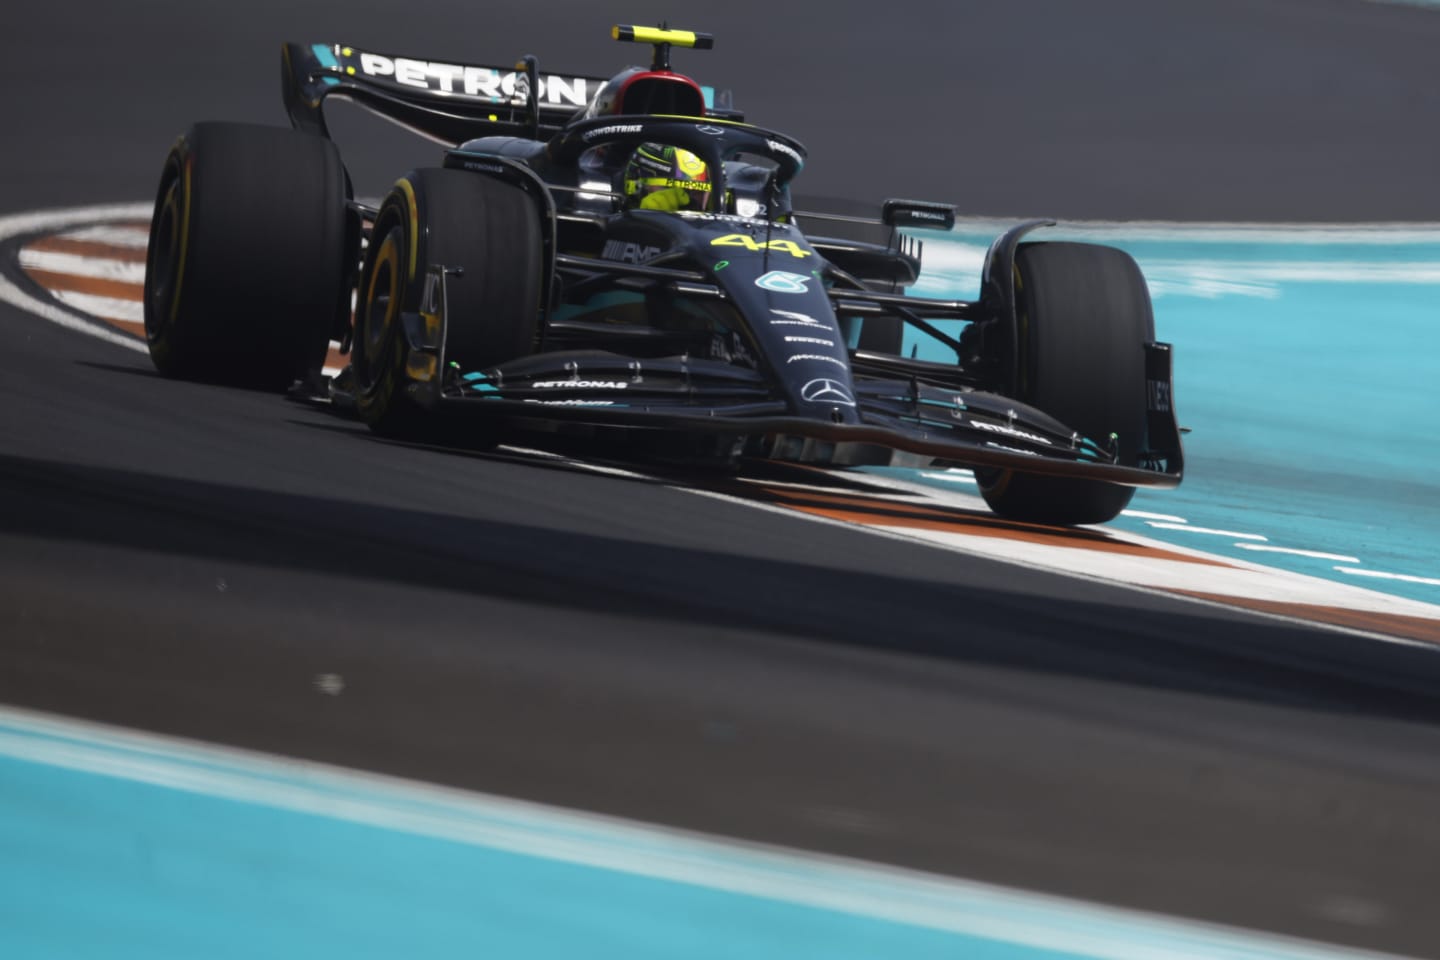 MIAMI, FLORIDA - MAY 05: Lewis Hamilton of Great Britain driving the (44) Mercedes AMG Petronas F1 Team W14 on track during practice ahead of the F1 Grand Prix of Miami at Miami International Autodrome on May 05, 2023 in Miami, Florida. (Photo by Chris Graythen/Getty Images)